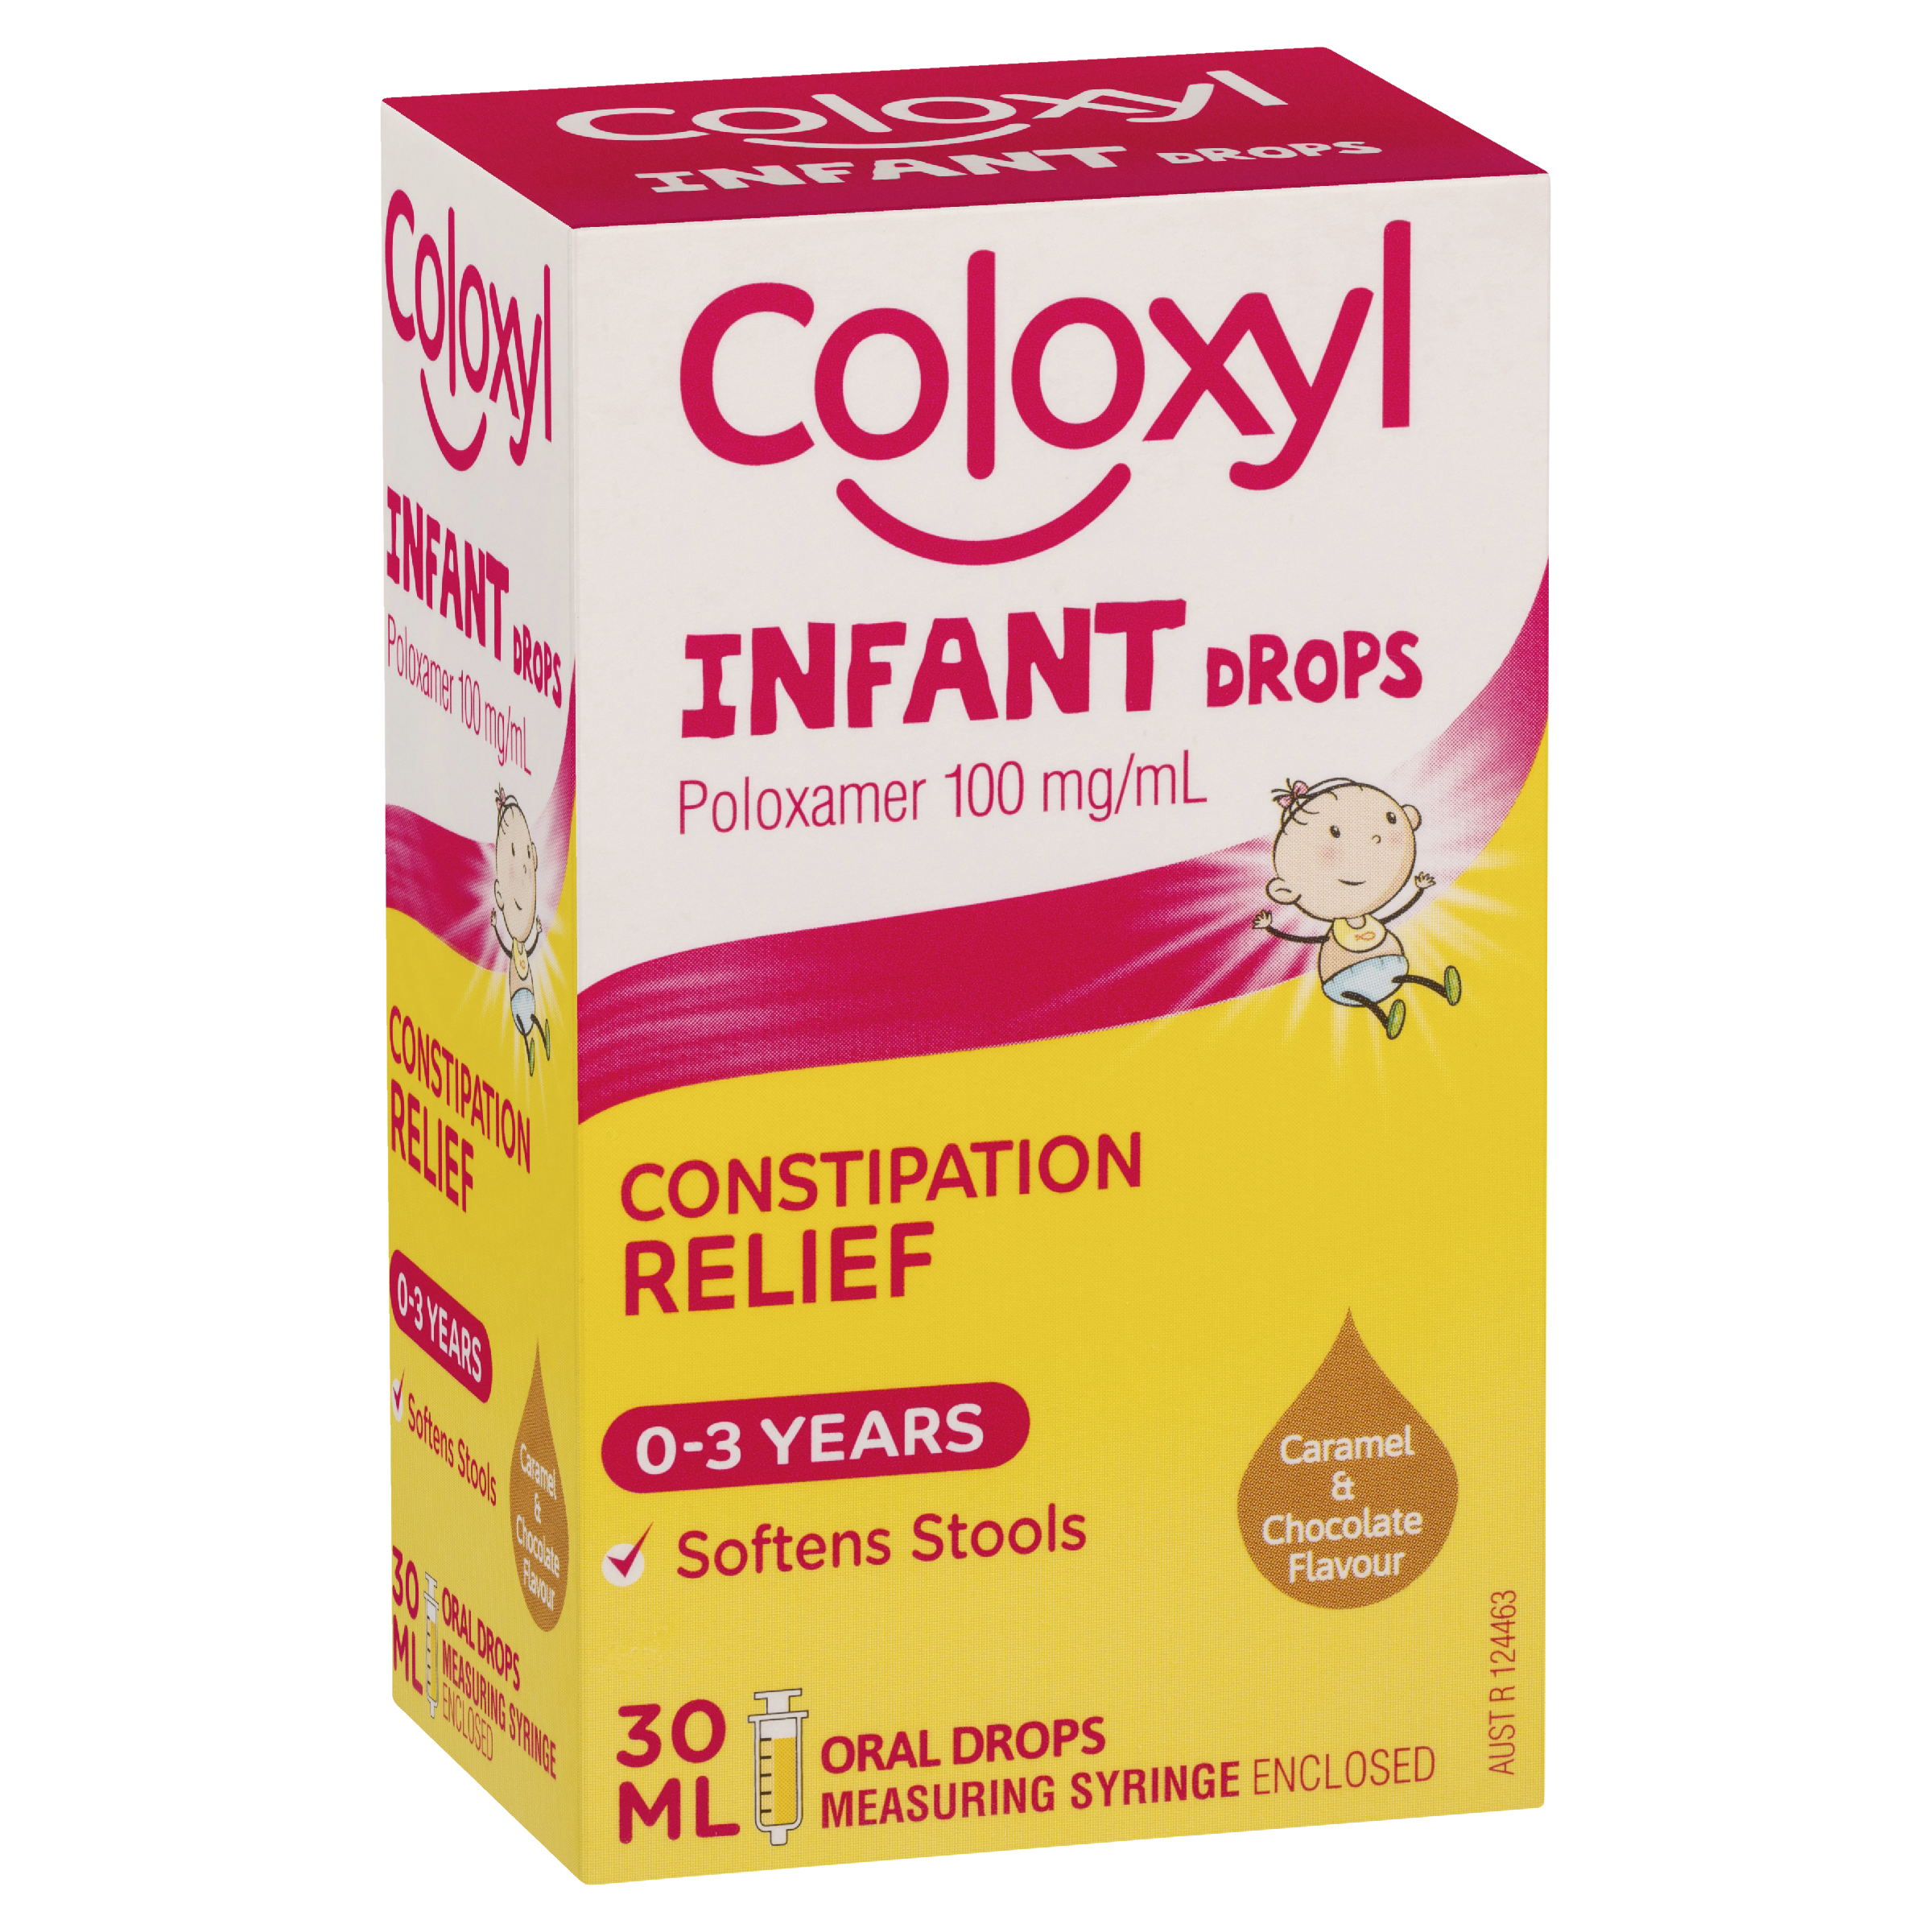 Coloxyl Infant Drops Constipation Relief